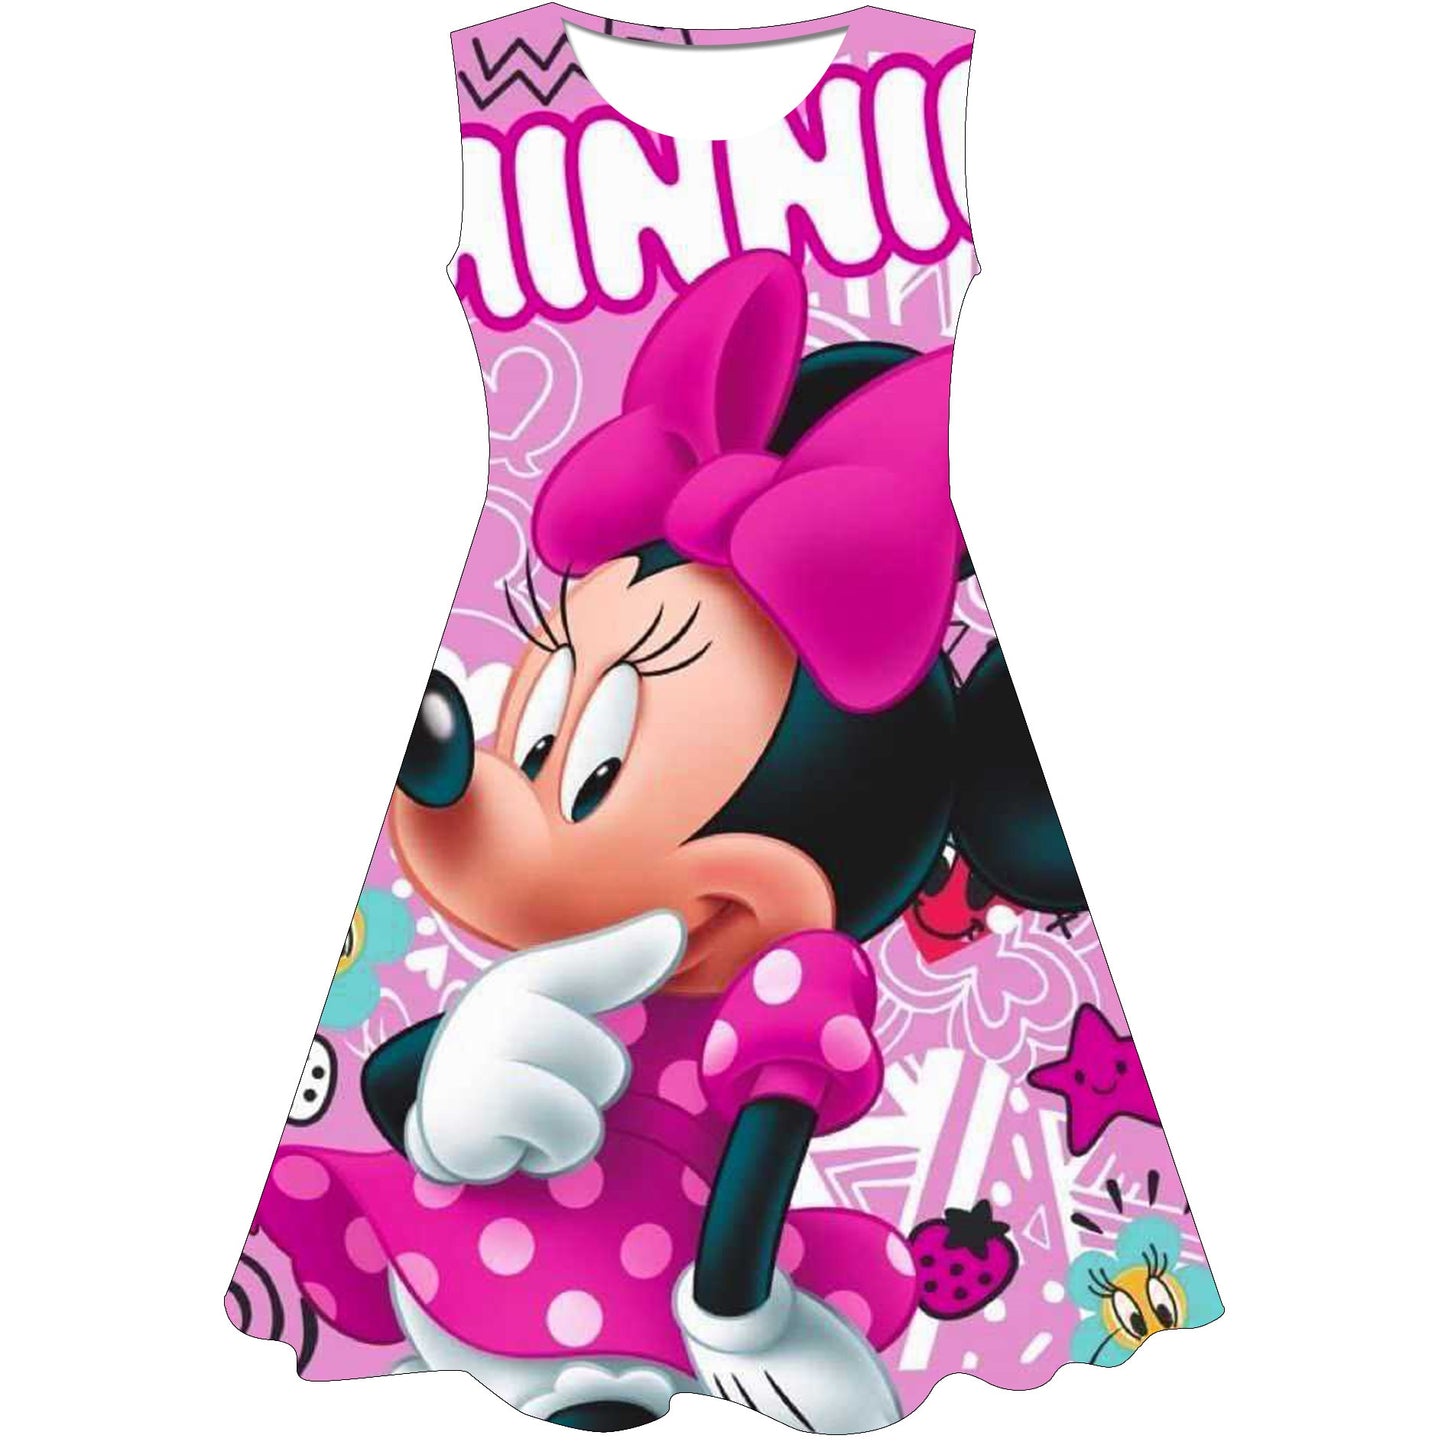 Cute Minnie Mouse Dress for Girls